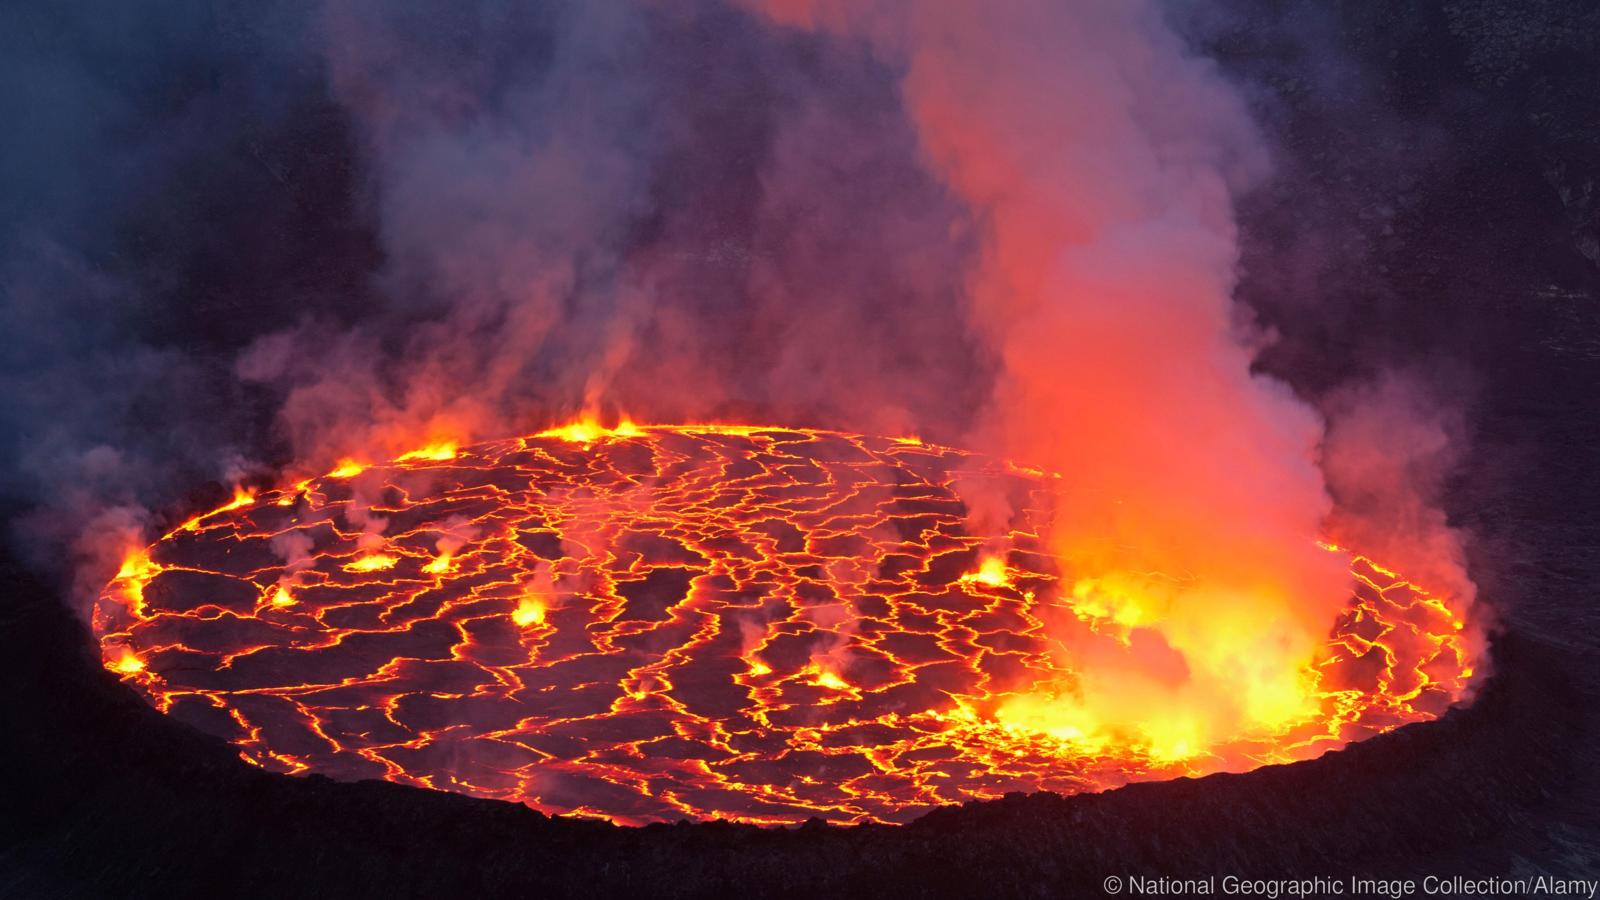 Molten rock cools and forms plates on the surface of a lava lake.